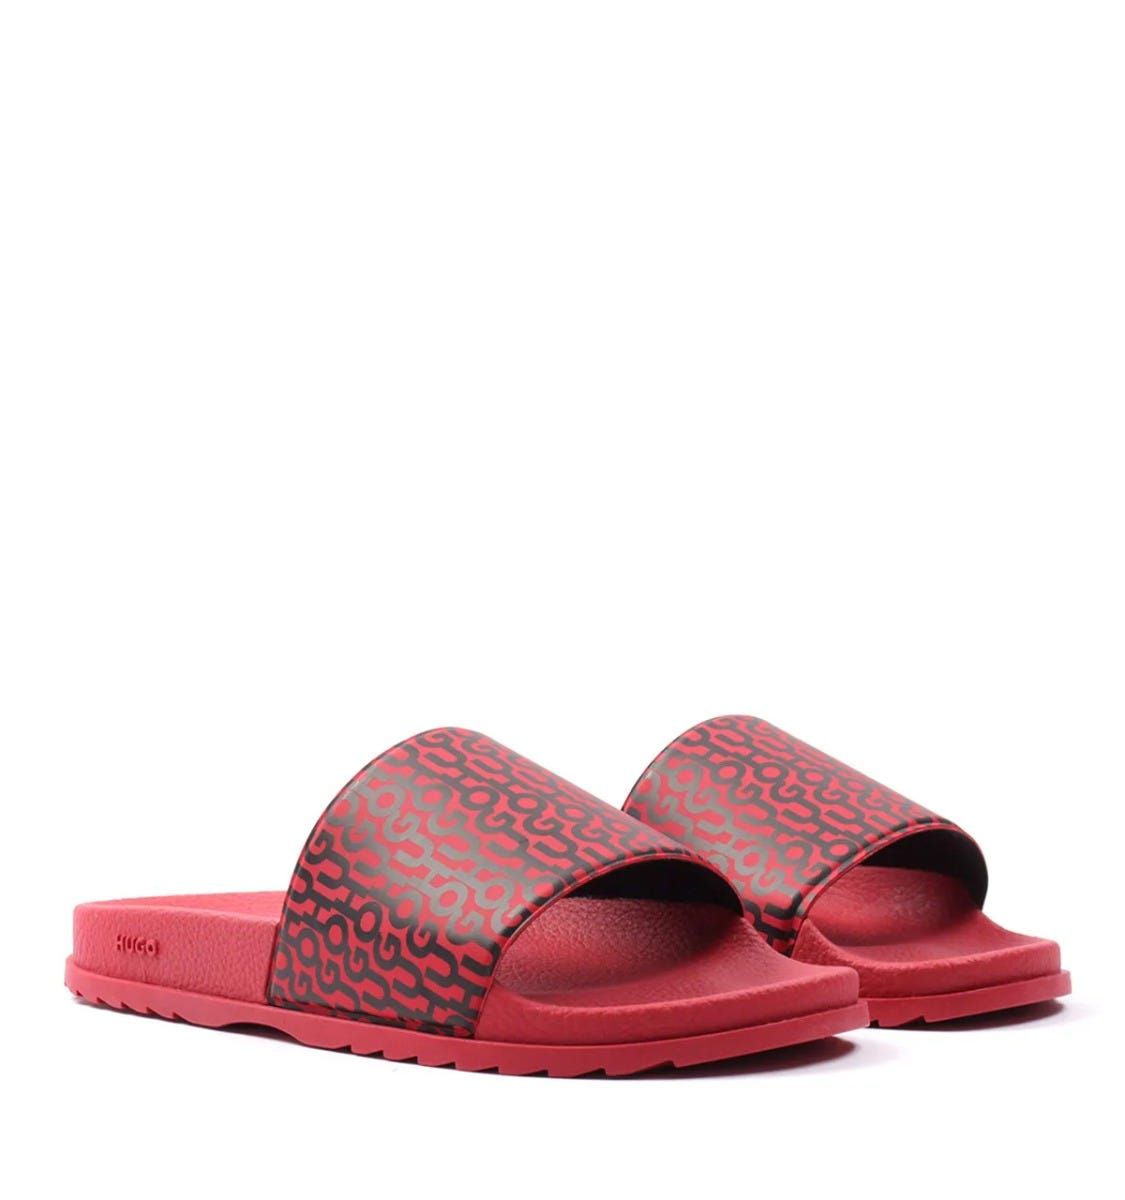 Slide your feet into standout style with the Match Slides from HUGO. These lightweight quicky drying slides are ready to make a statement with the iconic HUGO logo repeat printed across the rubberised foot straps.  Perfect for the pool, beach, garden or even lounging around. Featuring an ergonomically designed footbed for optimum comfort and a non slip outsole. Synthetic Rubber Composition, Ergonomic Designed Footbed, Non Slip Outsole, Made in Italy, HUGO Branding.